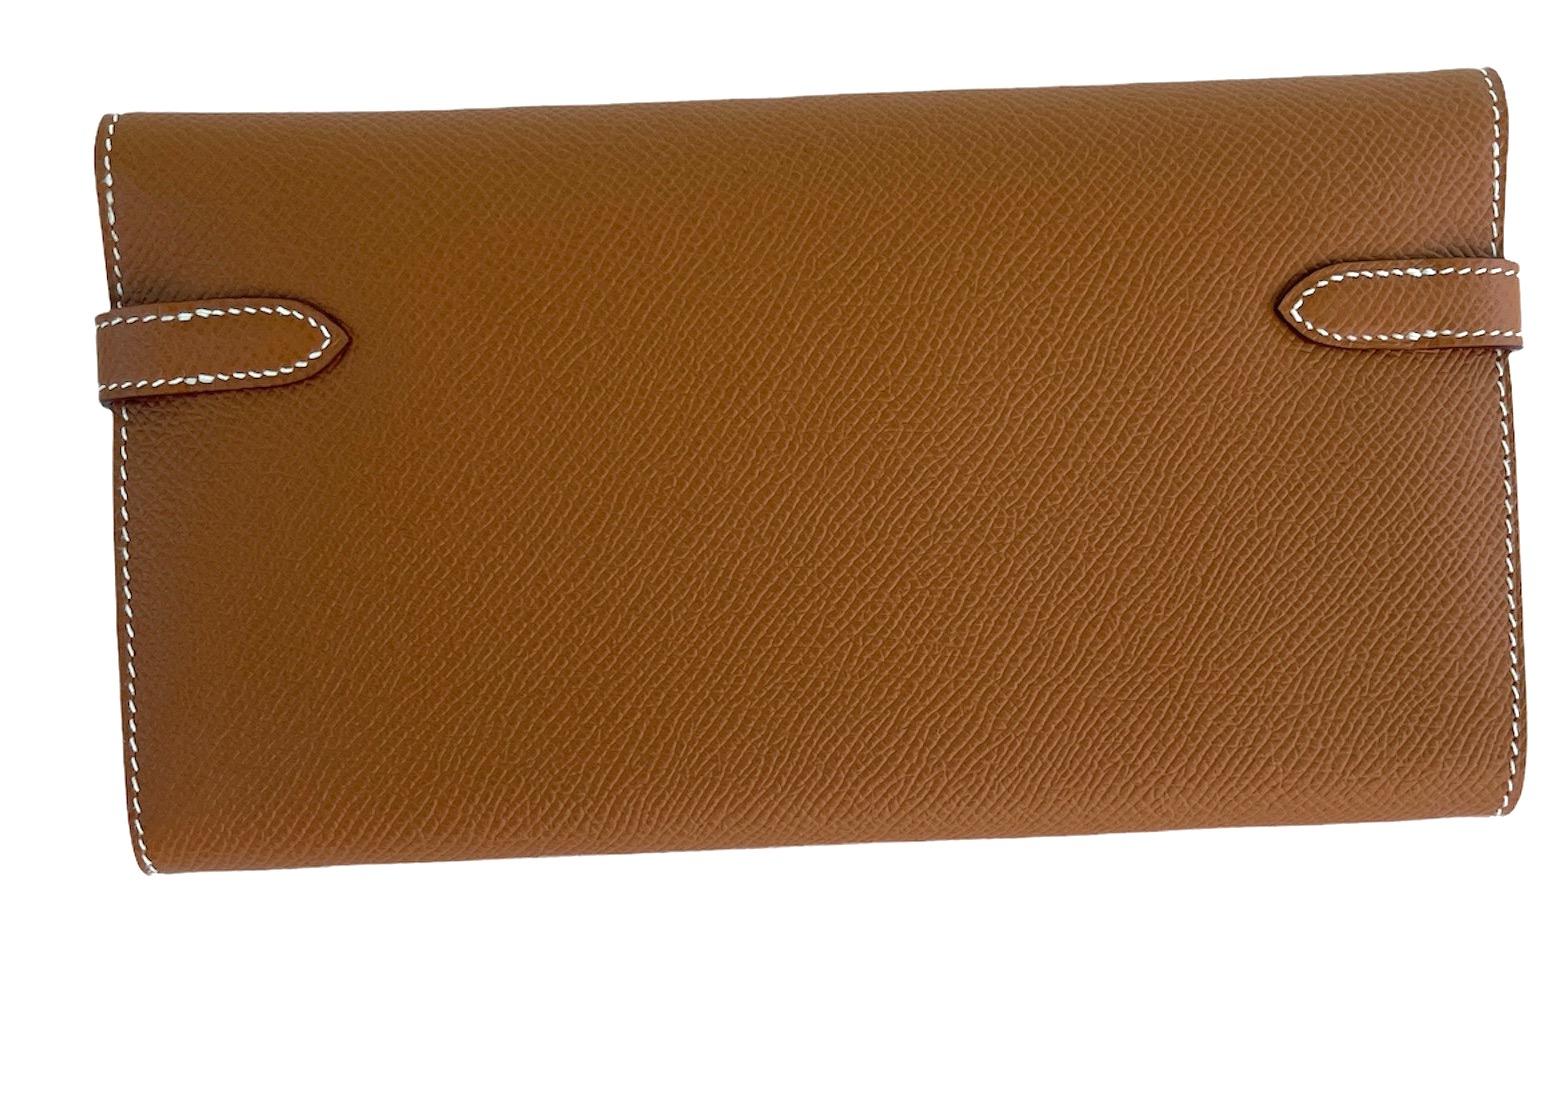 Hermes
Kelly Classique Long Wallet
Gold Epsom Leather
Gold Hardware



Tonal topstich 
 
 

New, never worn
Storefresh with plastic on




Hermes pull is a lock, on the zipper pocket
Purchased in May 2022 from Boutique




Hermes Box, Tissue, Ribbon